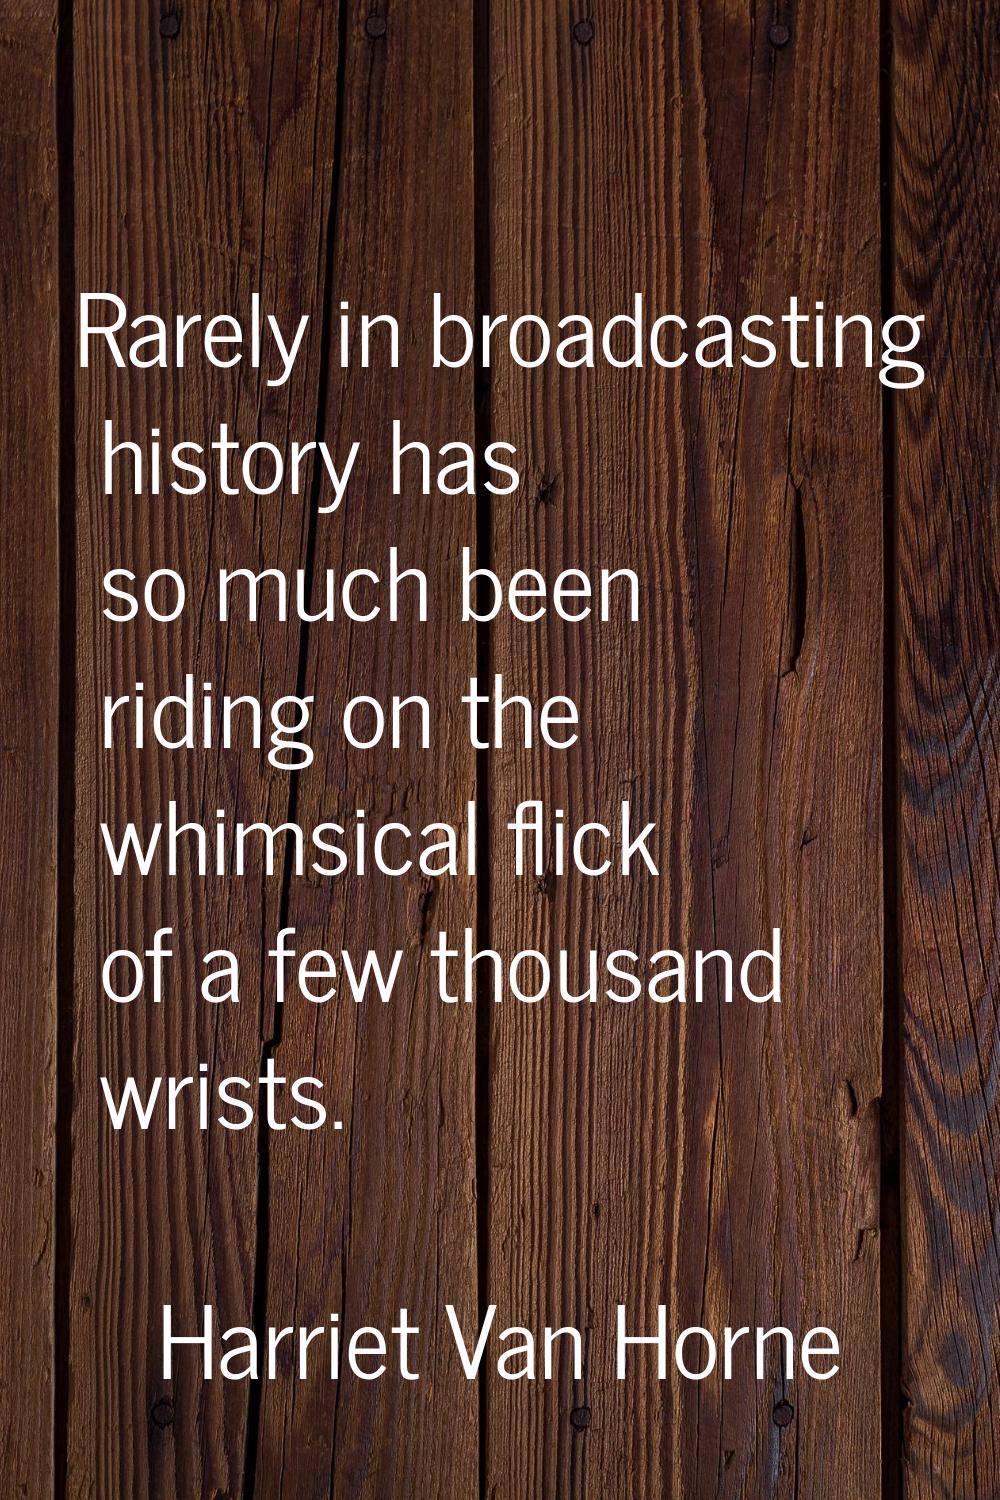 Rarely in broadcasting history has so much been riding on the whimsical flick of a few thousand wri